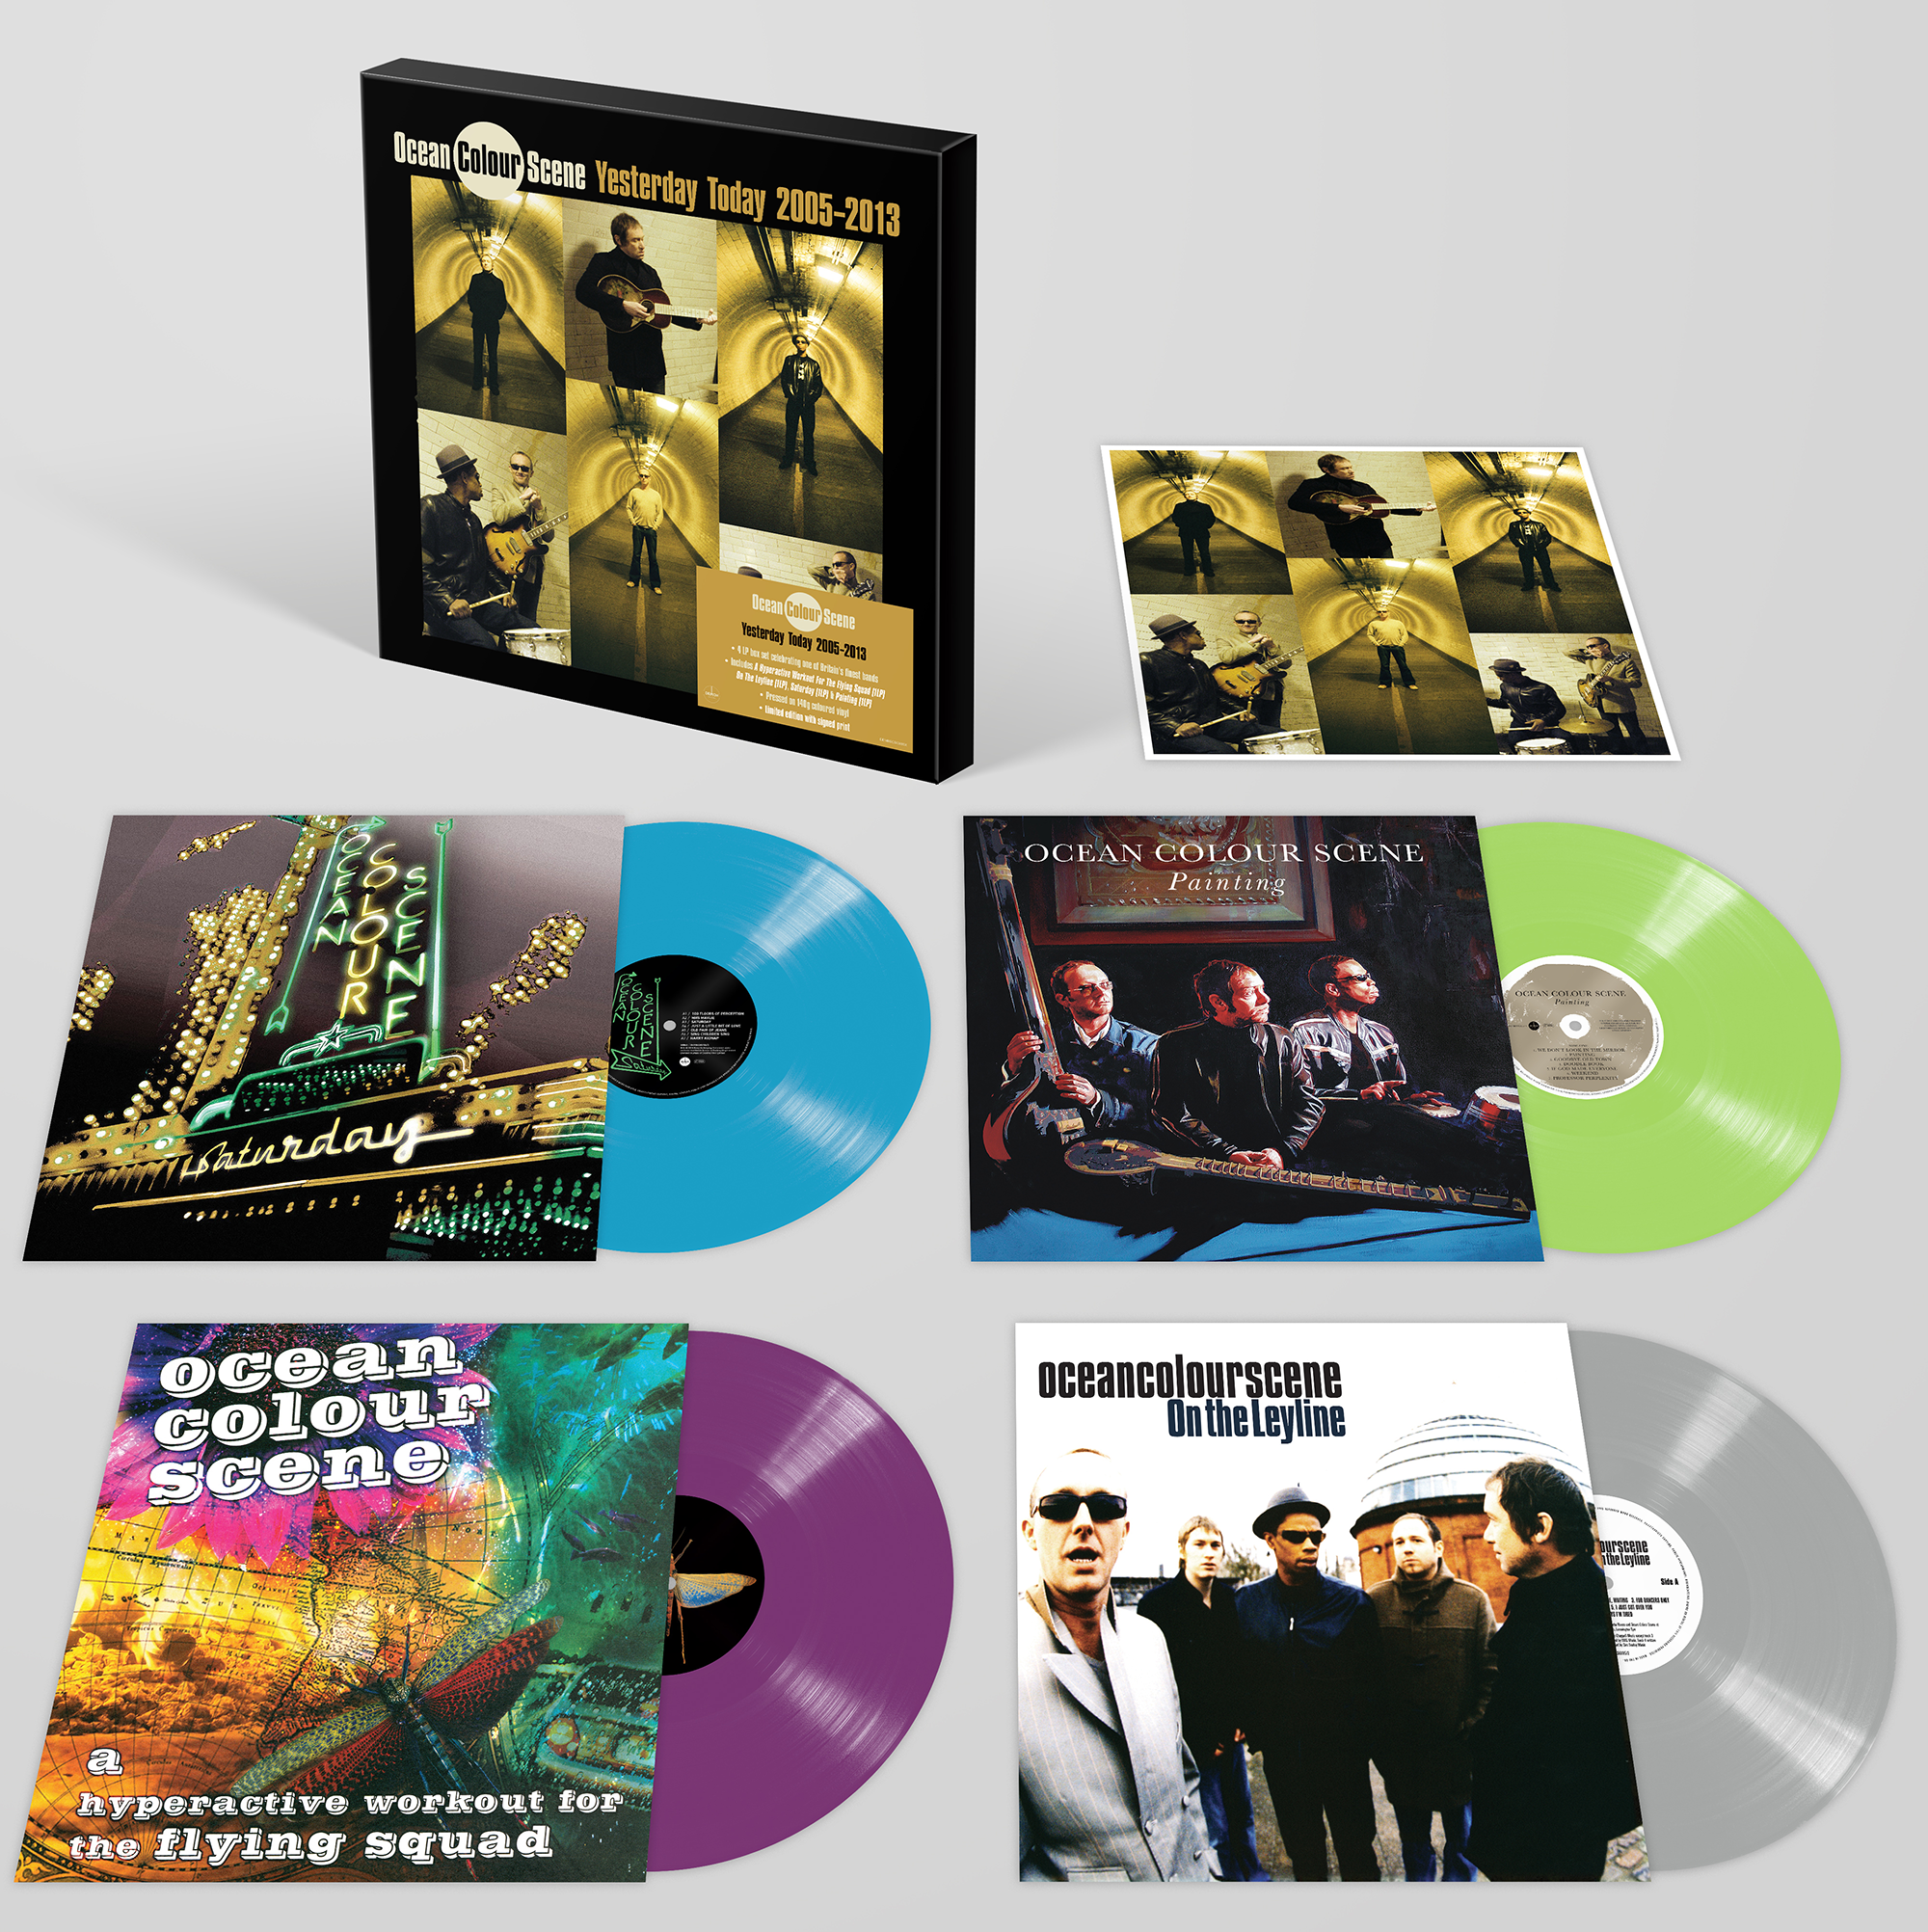 Ocean Colour Scene - Yesterday Today 2005 - 2013: Limited Signed Edition 4LP Vinyl Box Set